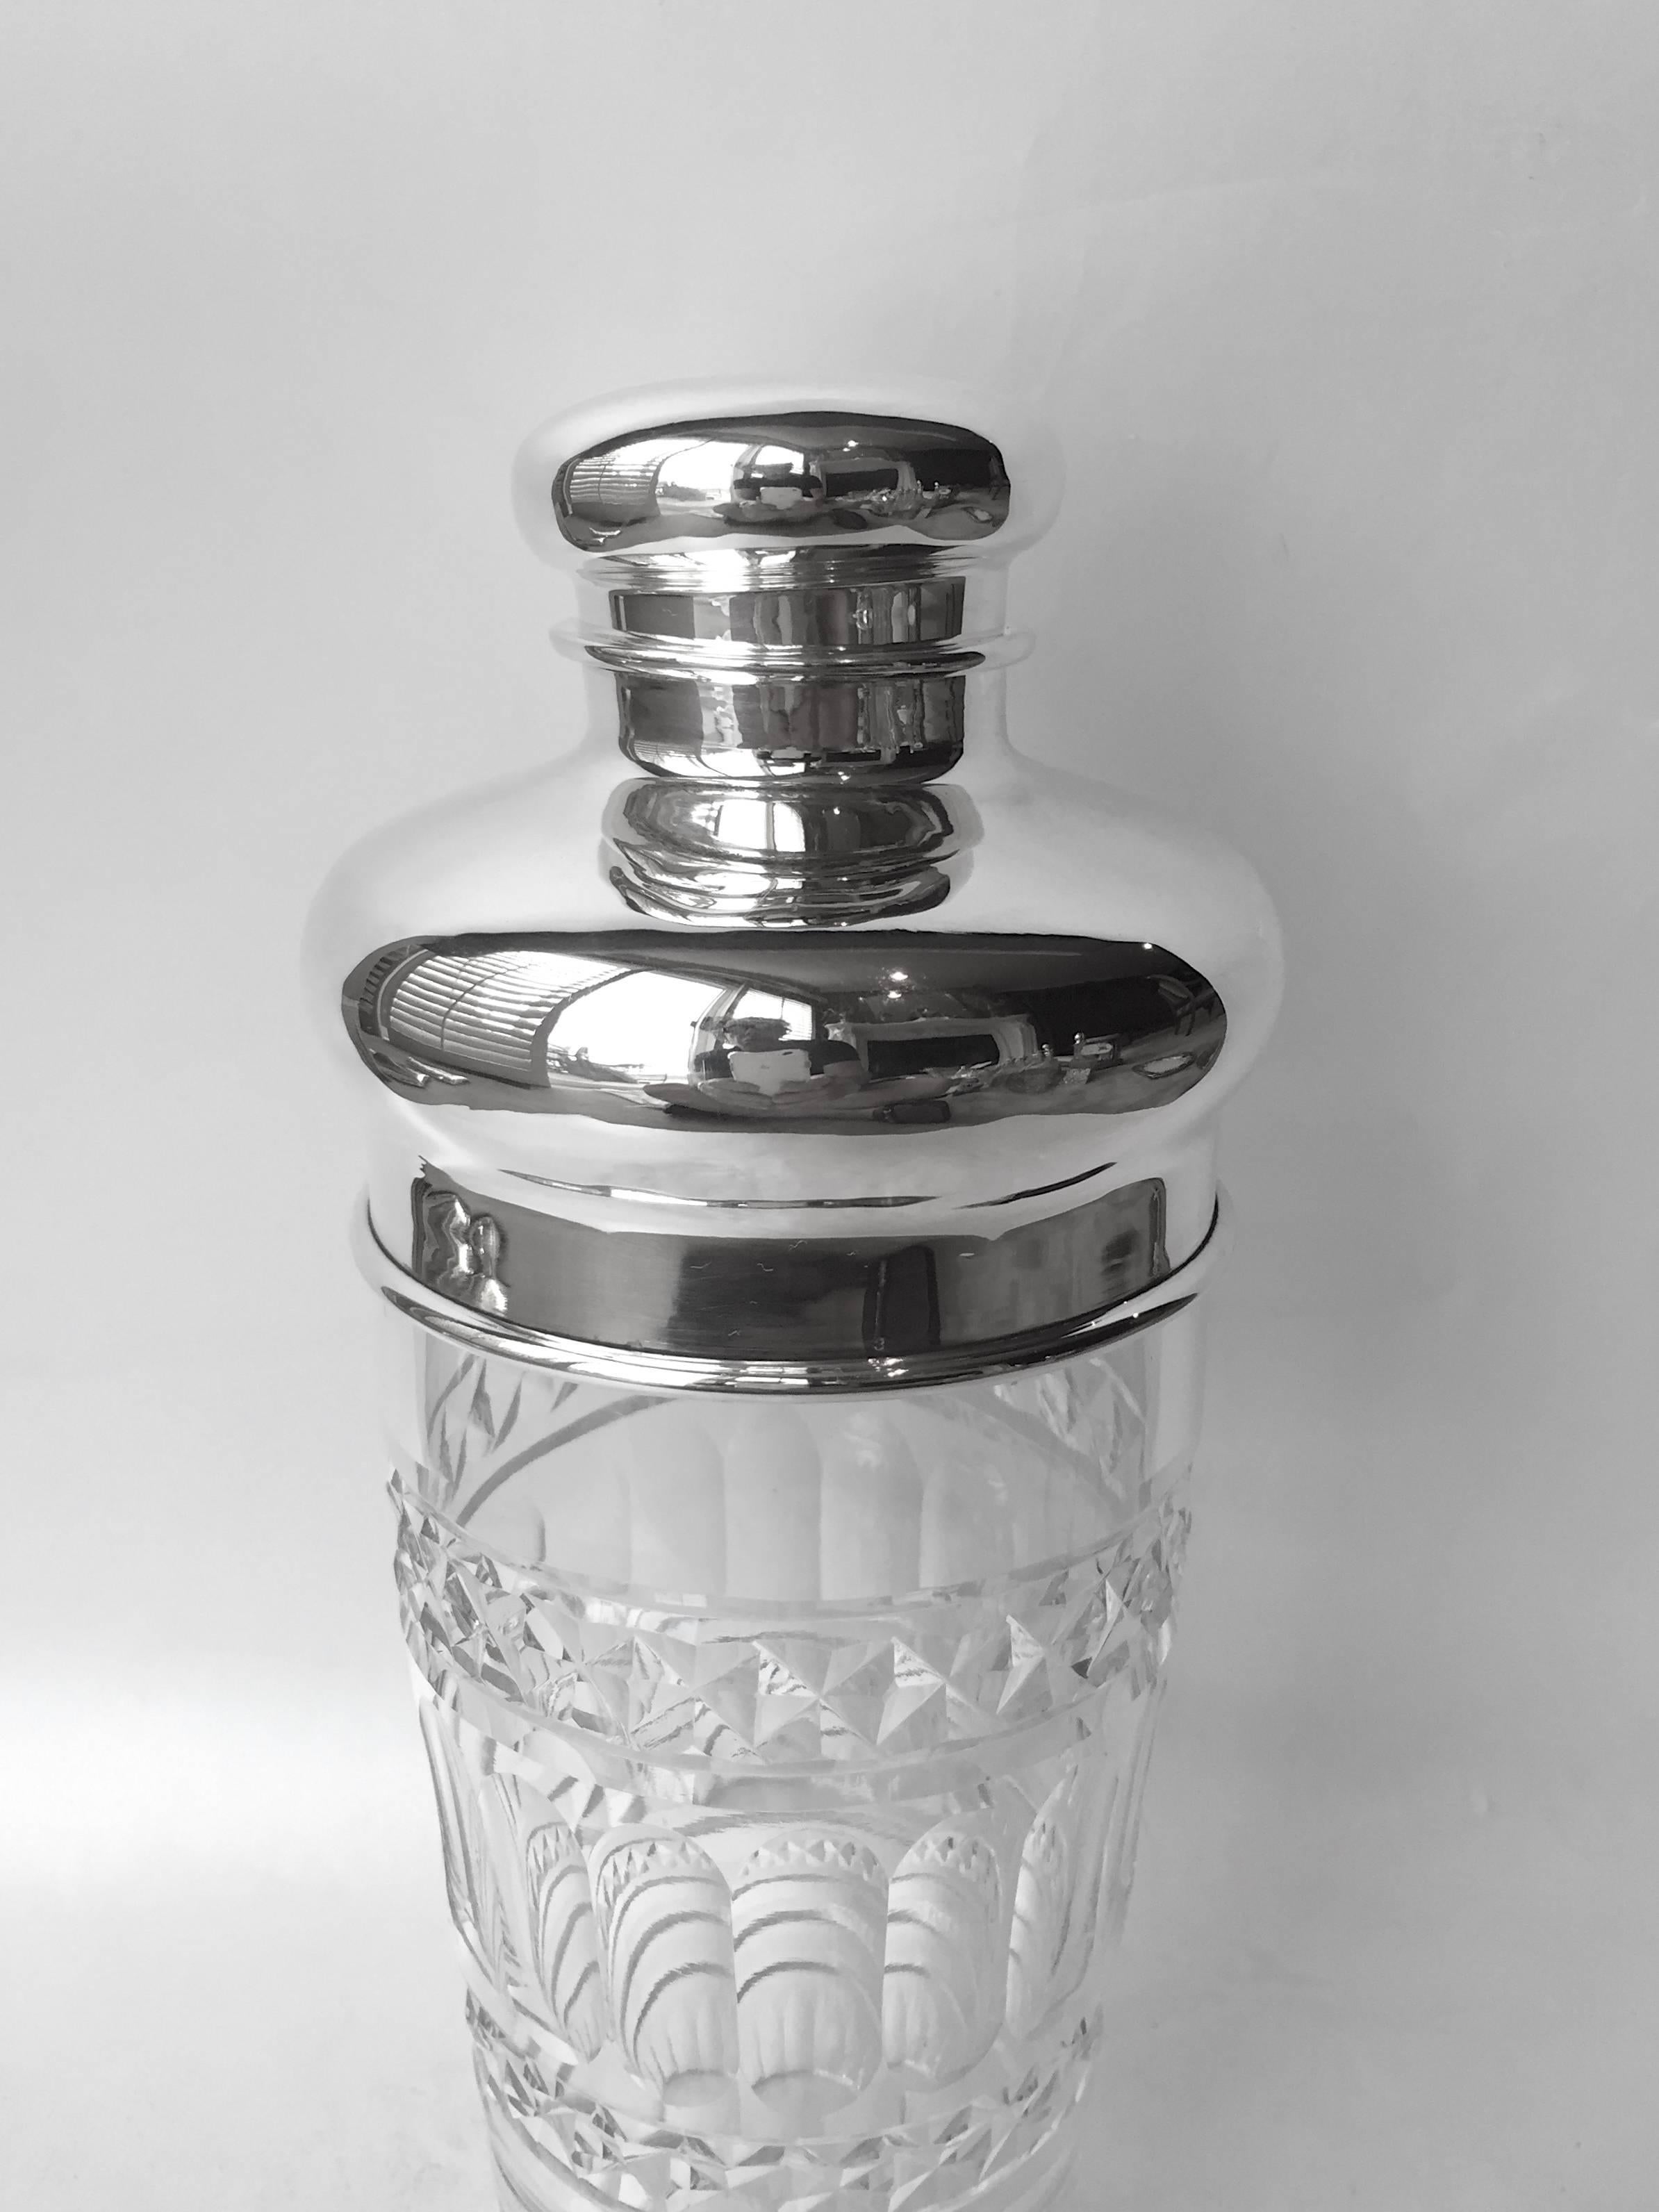 By Gorham Sterling and Hawkes cut-glass a very large and beautiful cocktail shaker you will be so proud to serve from and display in the bar area. Conservative in design but extremely classy. Made by two highly noted makers to be retailed at black